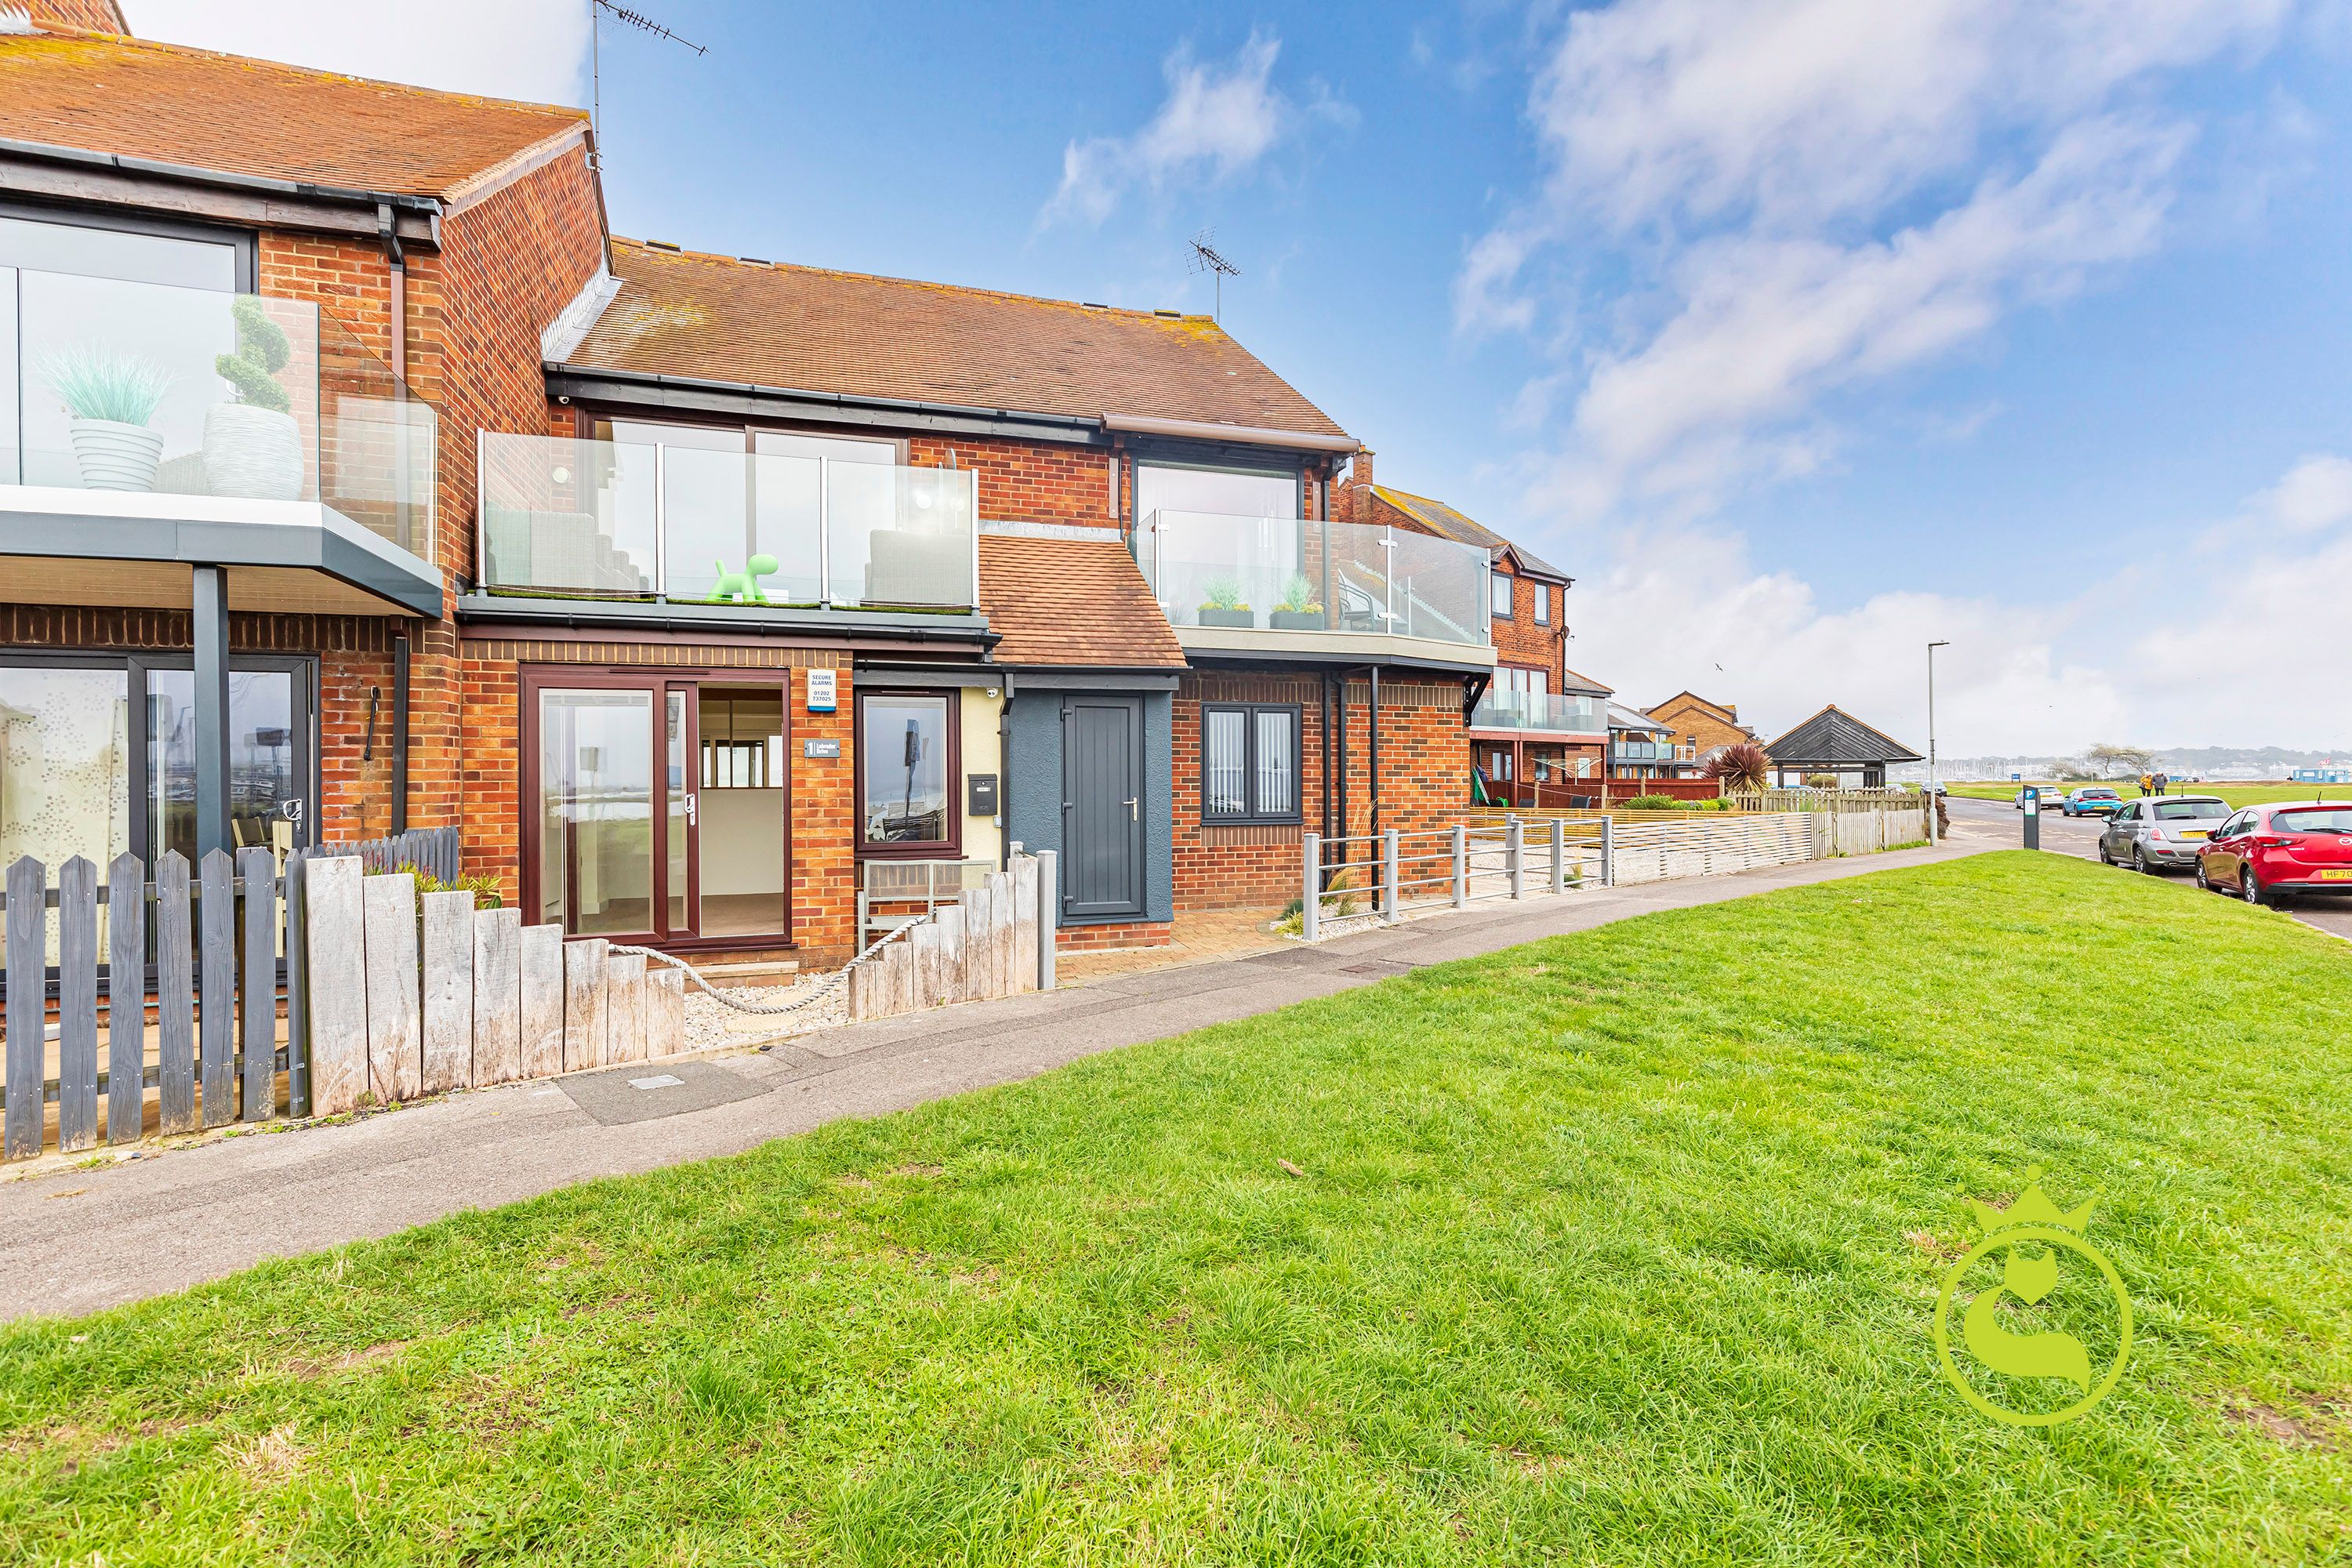 You will simply fall in love the moment you walk into the open plan living space and see the panoramic views of Poole Harbour of this modernised two bedroom terrace house. These properties rarely come to market so dont miss out and book your viewing slot today!